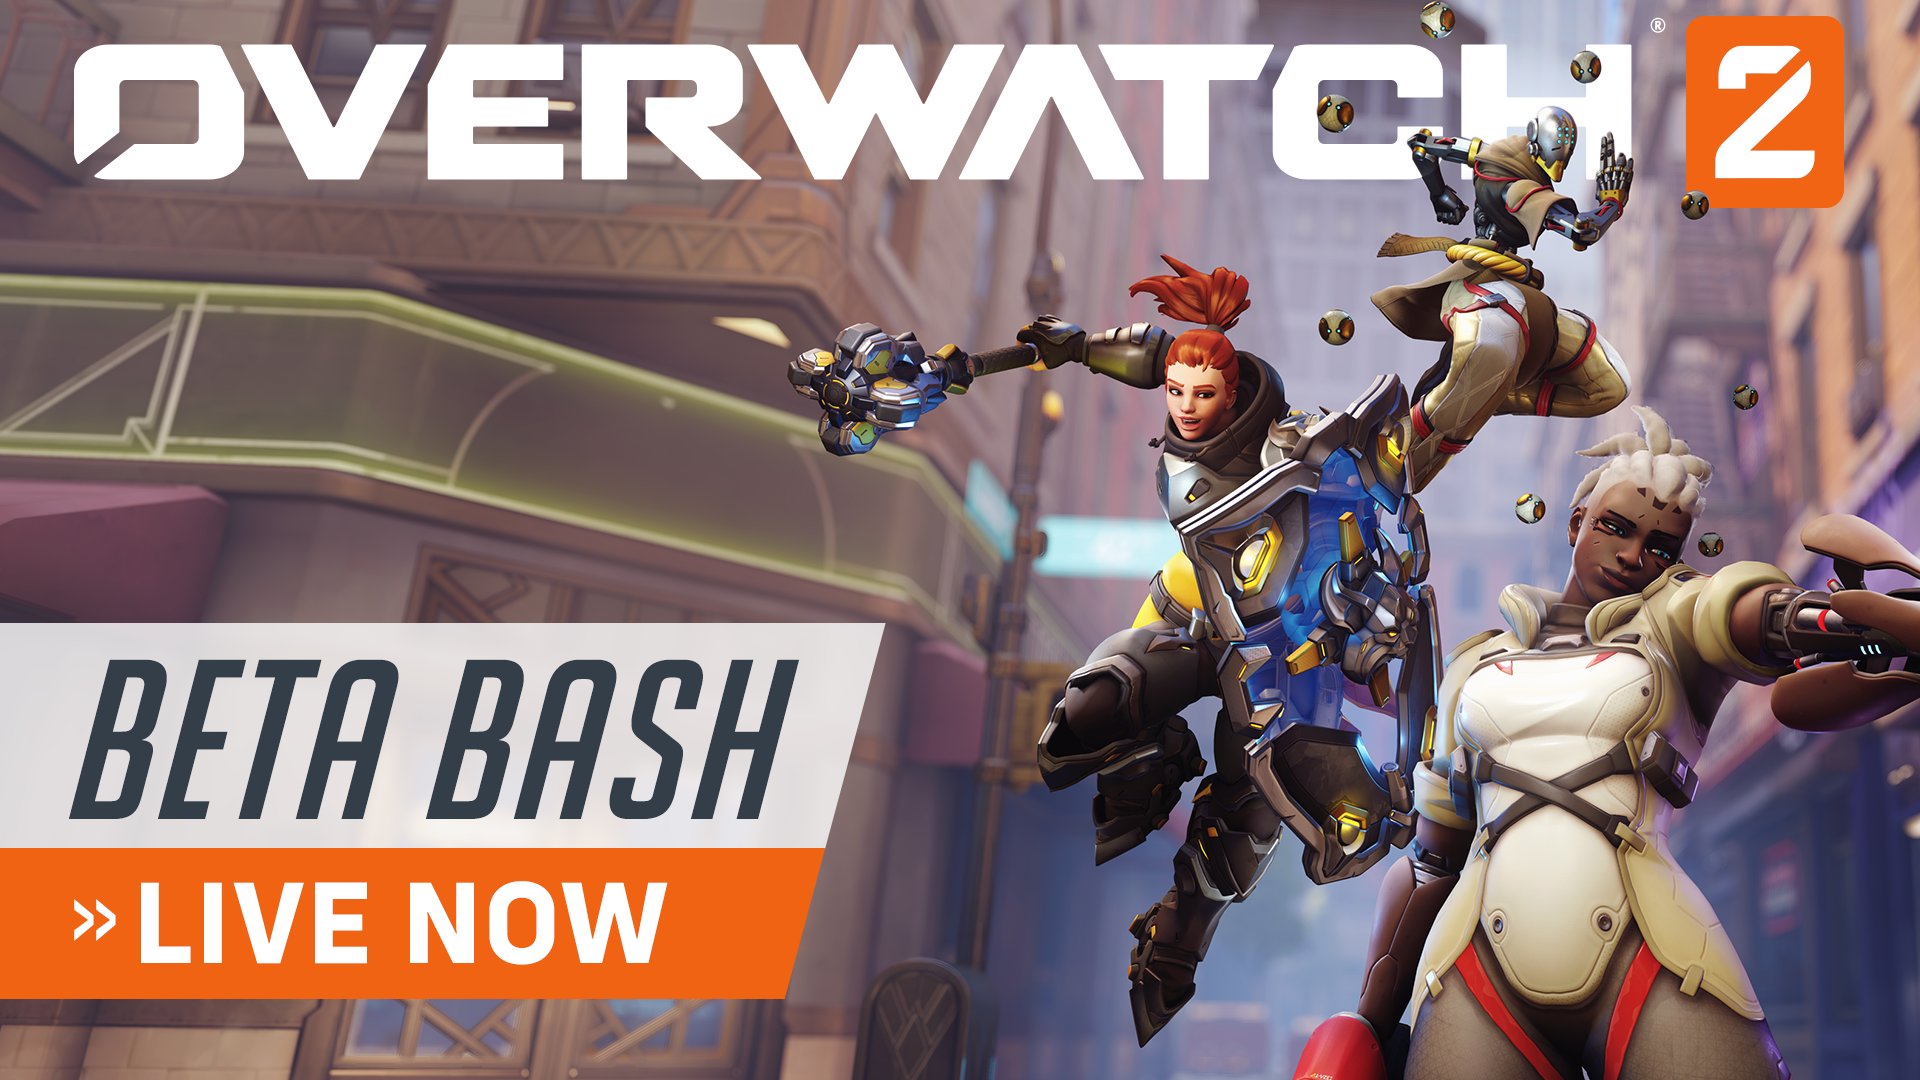 Overwatch The Beta Bash Is Now Live Ow Content Creator 5v5 Overwatch2 Pvp Gameplay Shoutcasted Matches Dev Interviews Ow2 Beta Twitch Drops T Co 9zxnqbktxt T Co 8yxlimu9fr